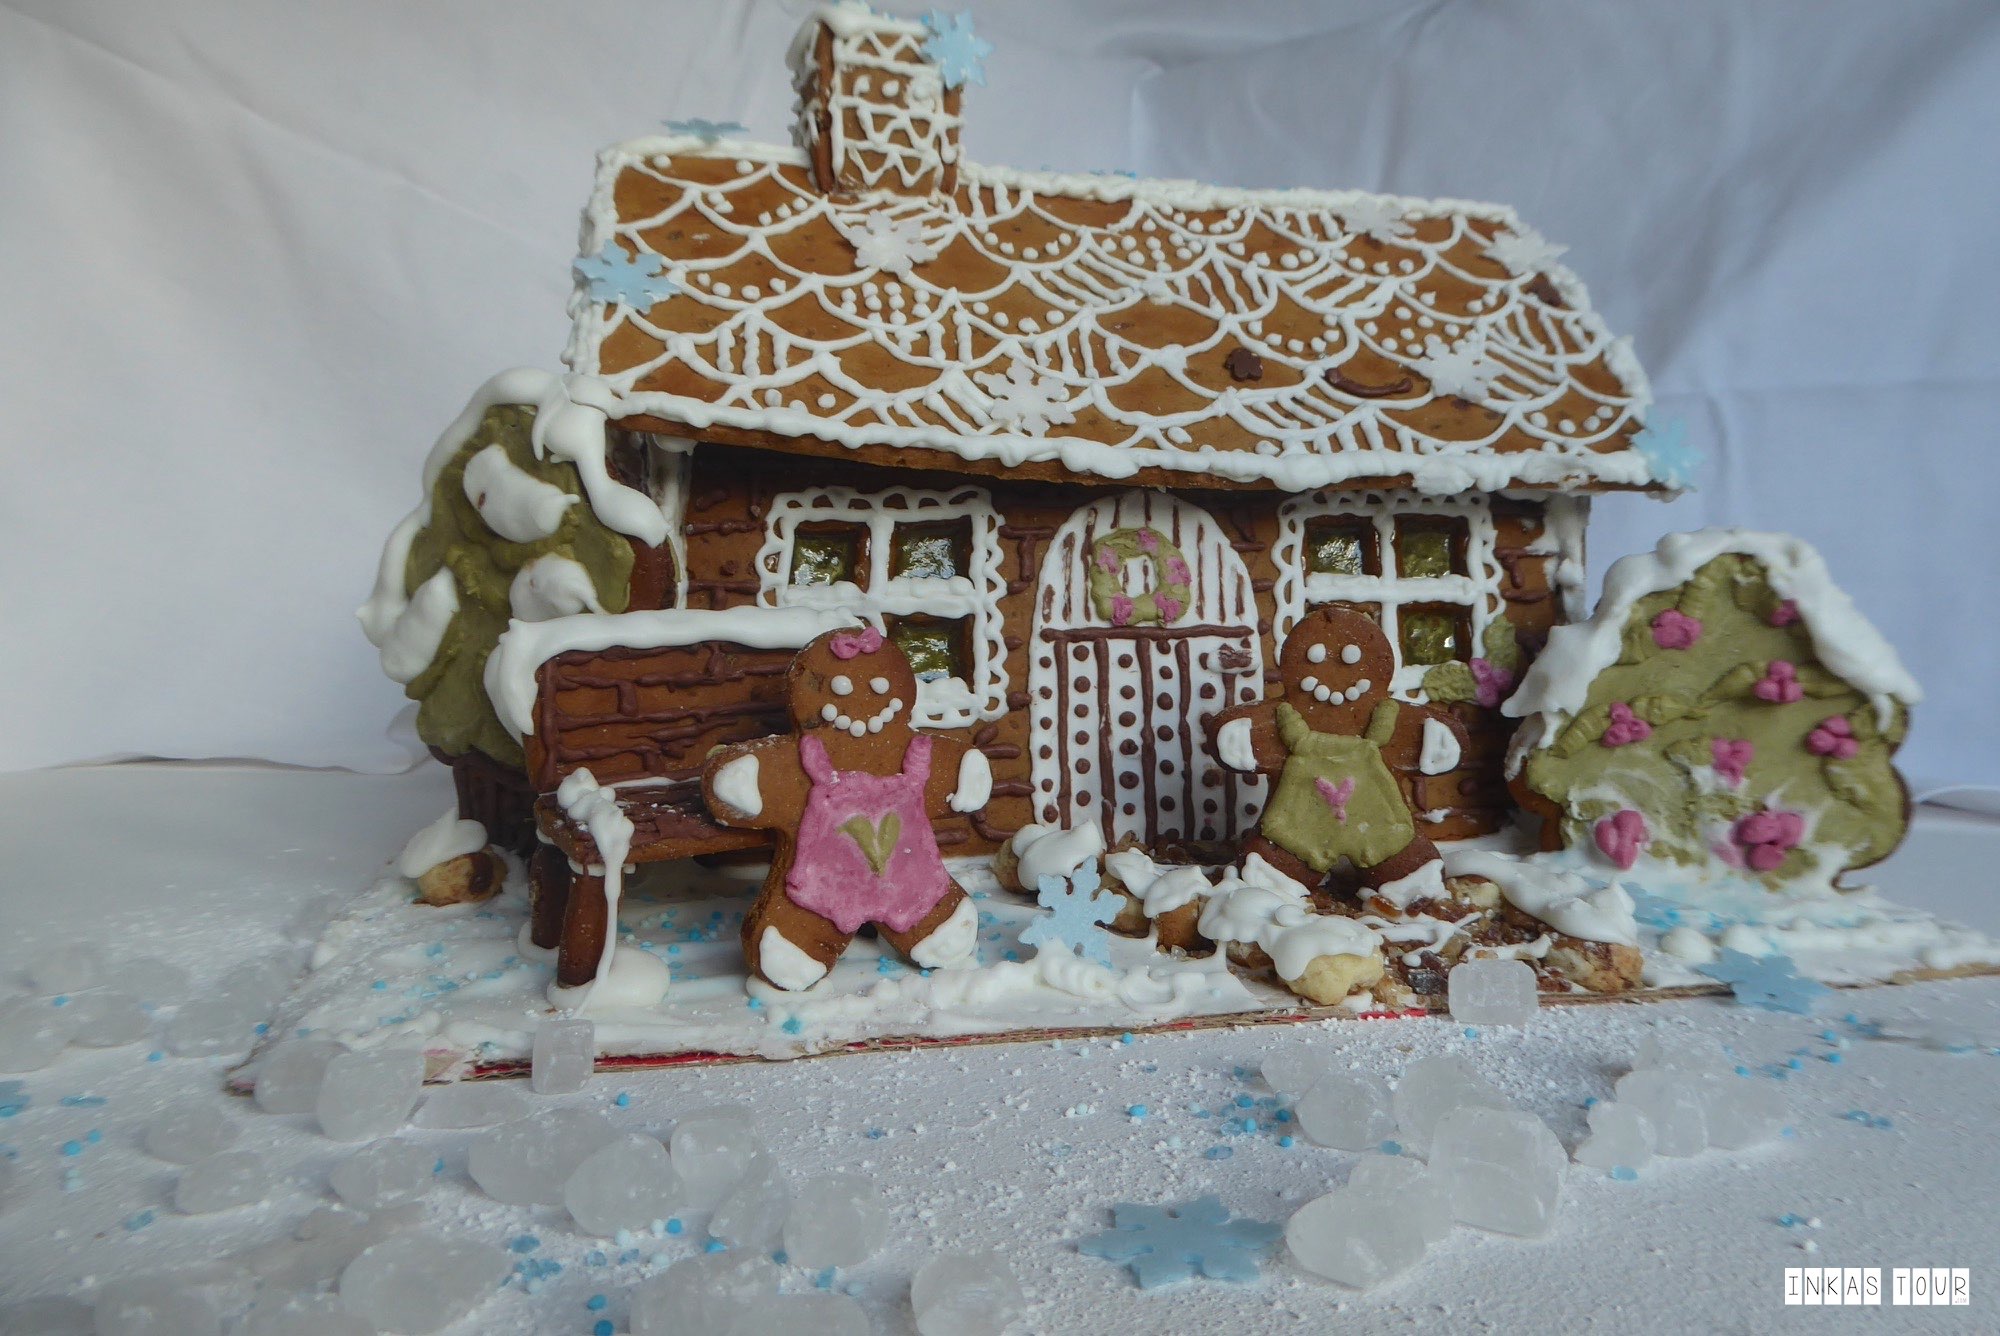 Gingerbread House Lebkuchen Haus Decorate and Bake Recipe Rezept Christmas Advents Calender Customs and Traditions Inkas Tour Travelblog Baking Blog Food around the World Baking a Gingerbread House